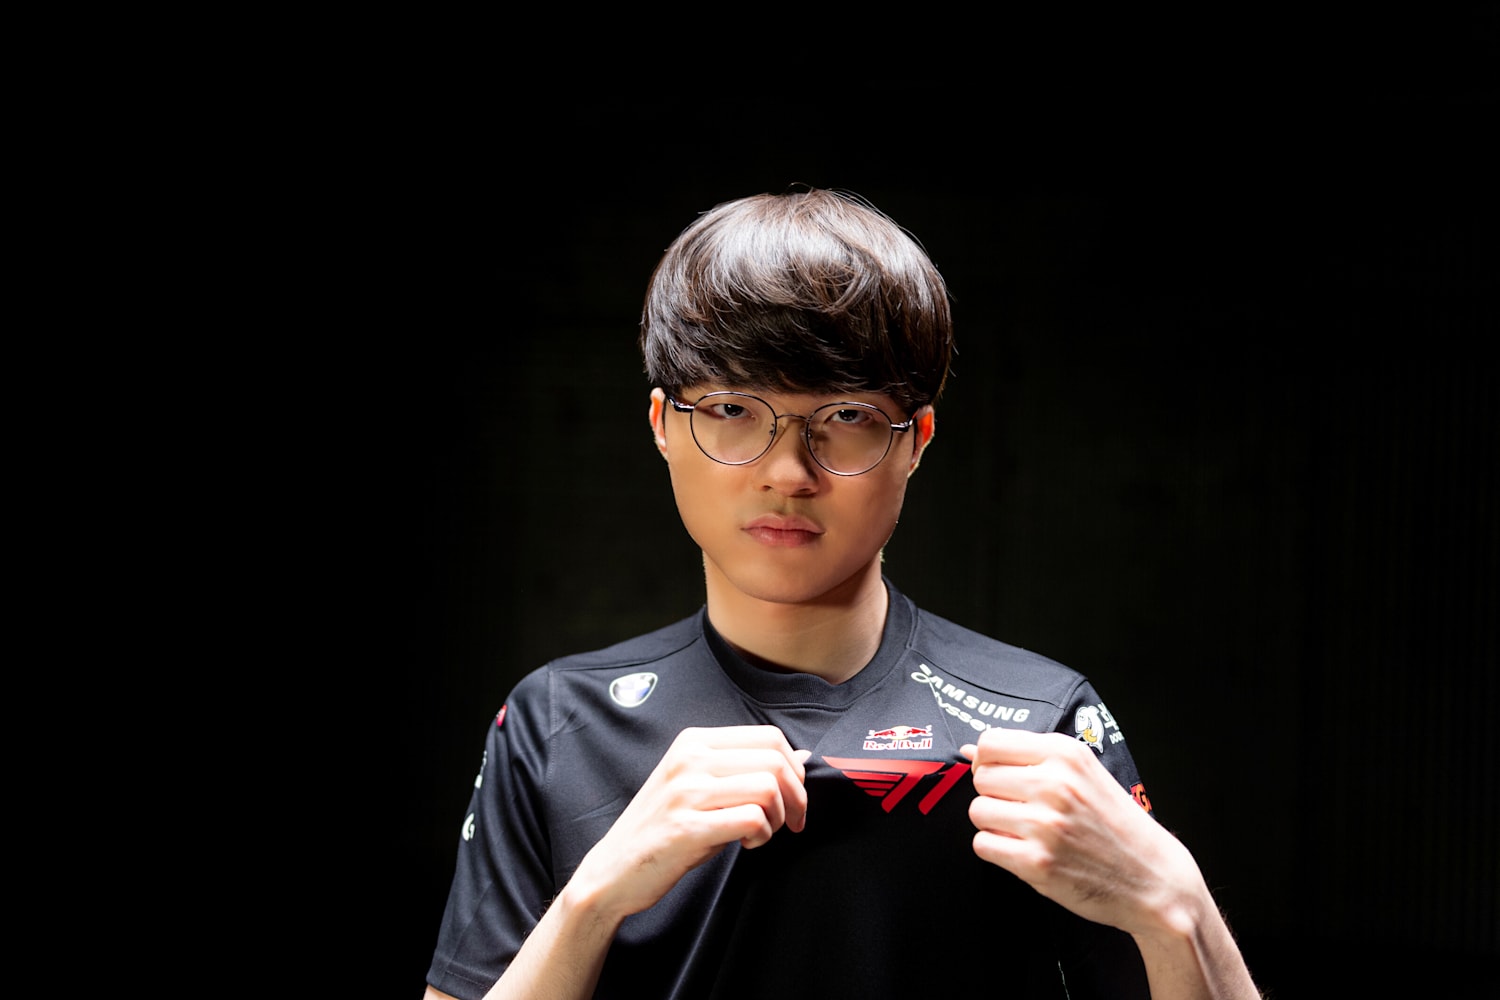 Faker Lol pro gamer facts Red Bull Esports